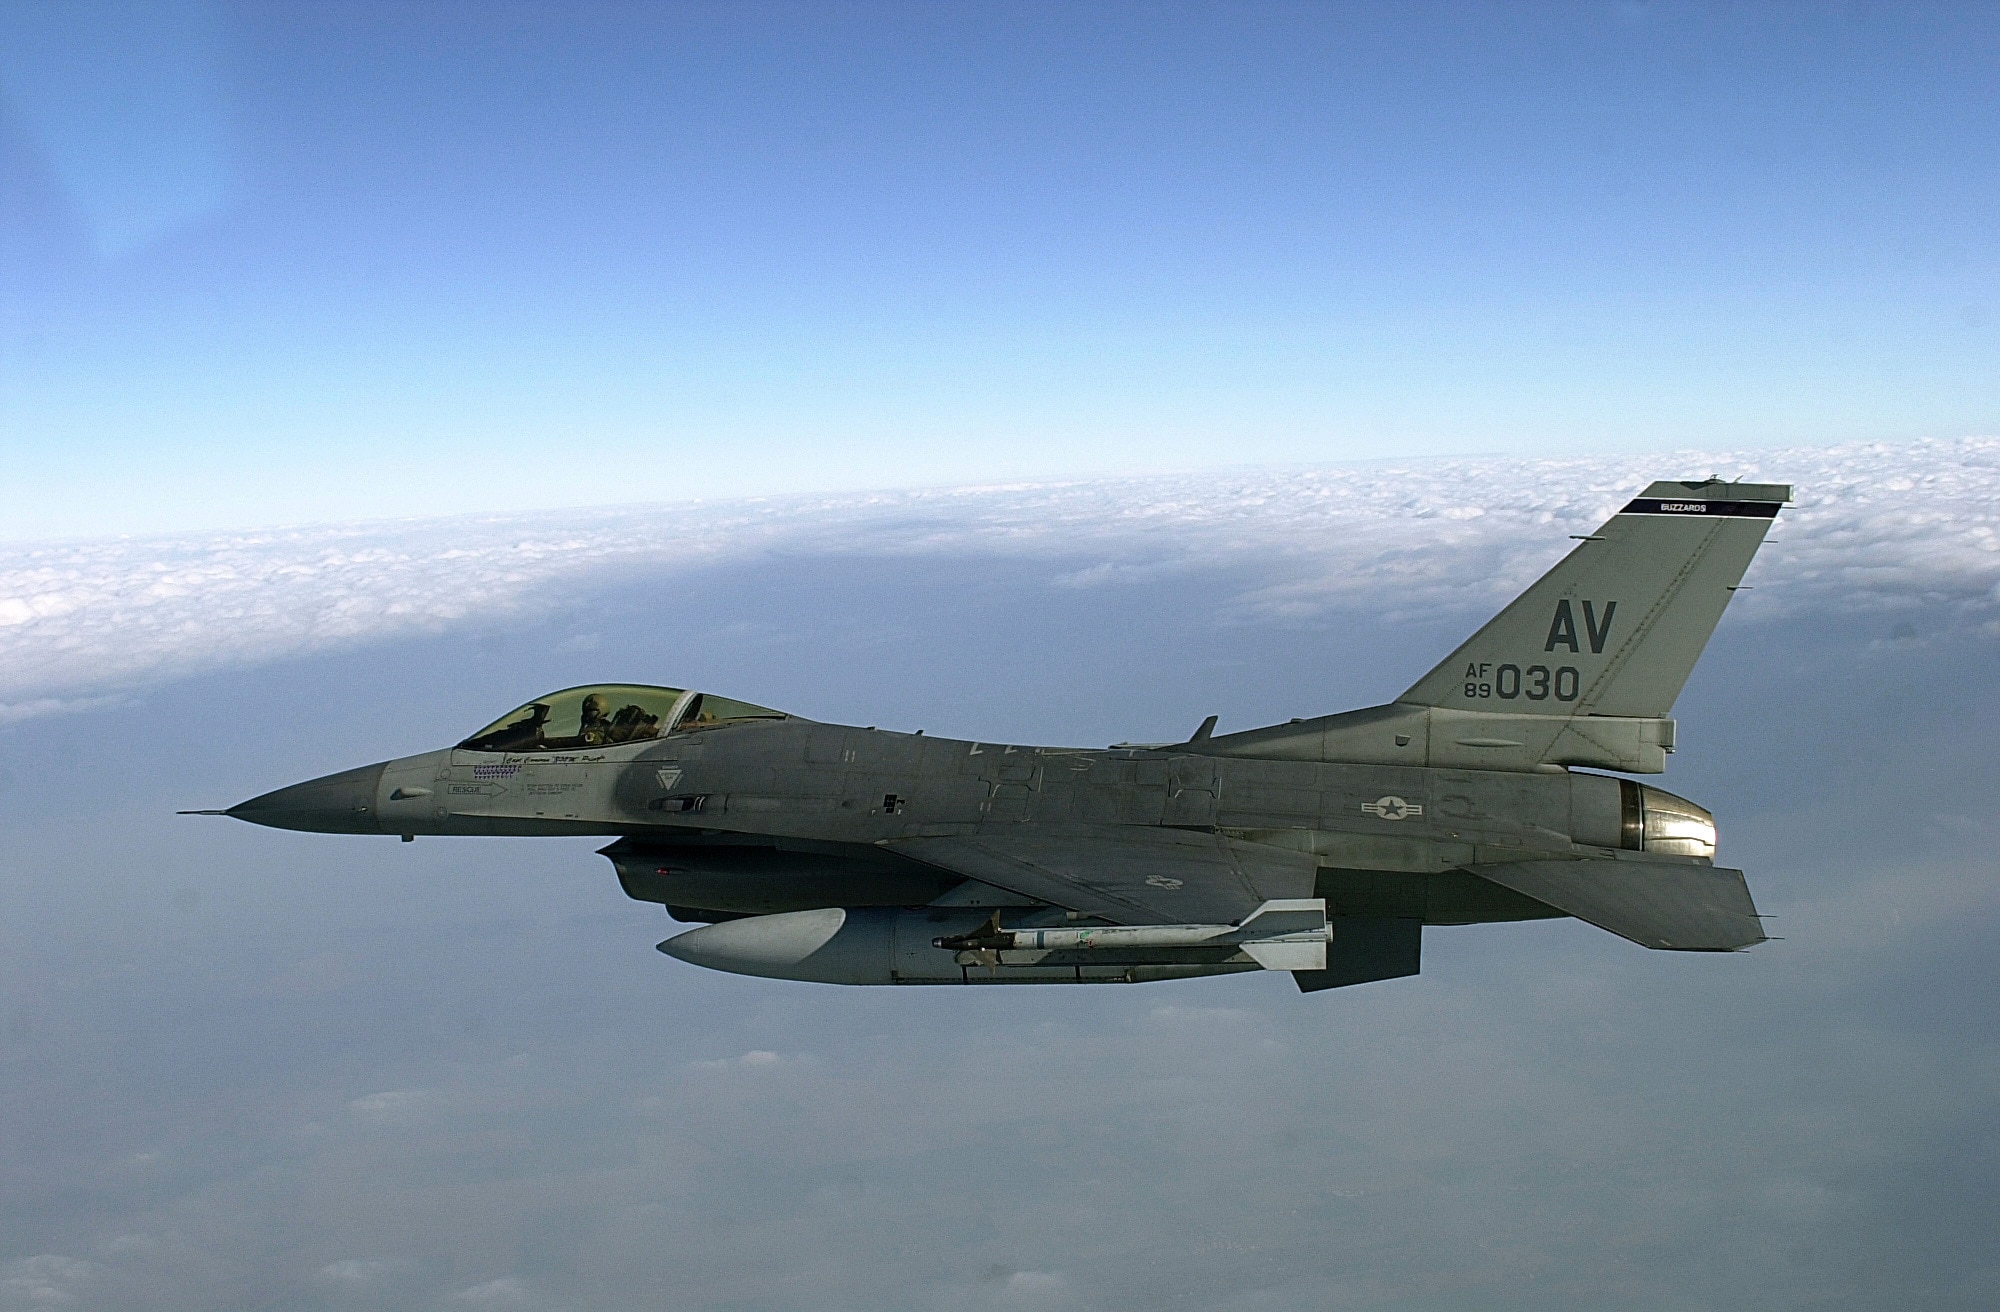 OVER ITALY -- An U.S. F-16 Fighting Falcon flies towards Rimini, Italy to join with the Italian air force in a training mission.   U.S. Air Forces from the 510th Fighter Squadron, Aviano Air Base, Italy and Italian Air Forces from the 83rd Combat Search and Rescue Squadron, Rimini, Italy, participated in a 4-day training mission from Feb. 5 to Feb. 8, 2001.  The mission involved U.S. F-16 aircrews locating and authenticating survivors and coordinate pickup with Italian rescue crews.  F-16s were also tasked with escorting helicopters to protect them from air and ground threats.  This is the first ever tasking of a full-time combat search and rescue mission for F-16s from the 510th Fighter Squadron. (U.S. Air Force photo by Tech. Sgt. Dave Ahlschwede)
